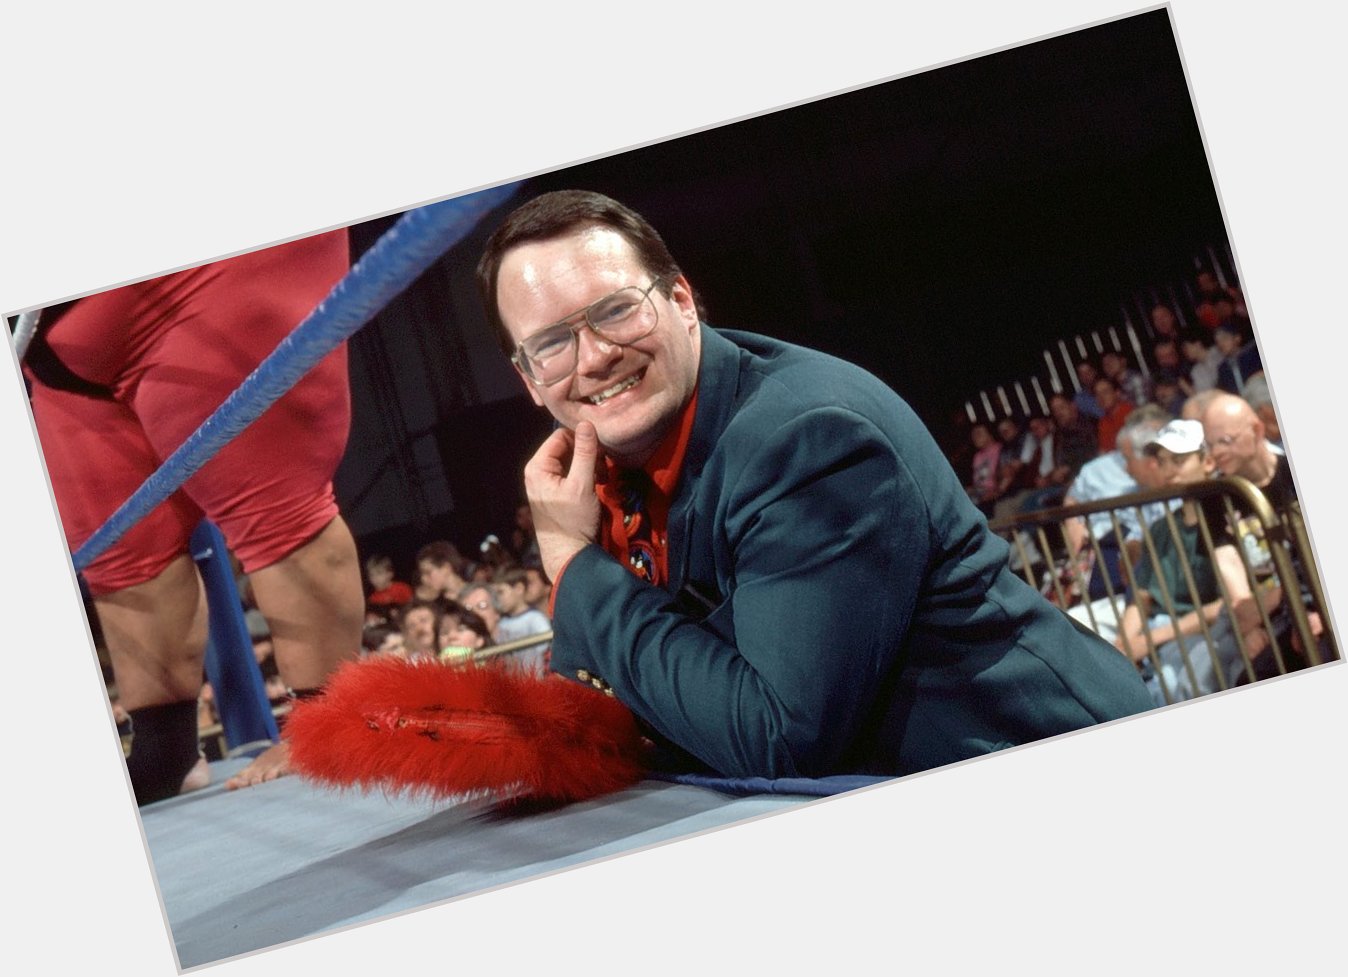 Happy Belated Birthday to promoter/manager/podcaster Jim Cornette! 